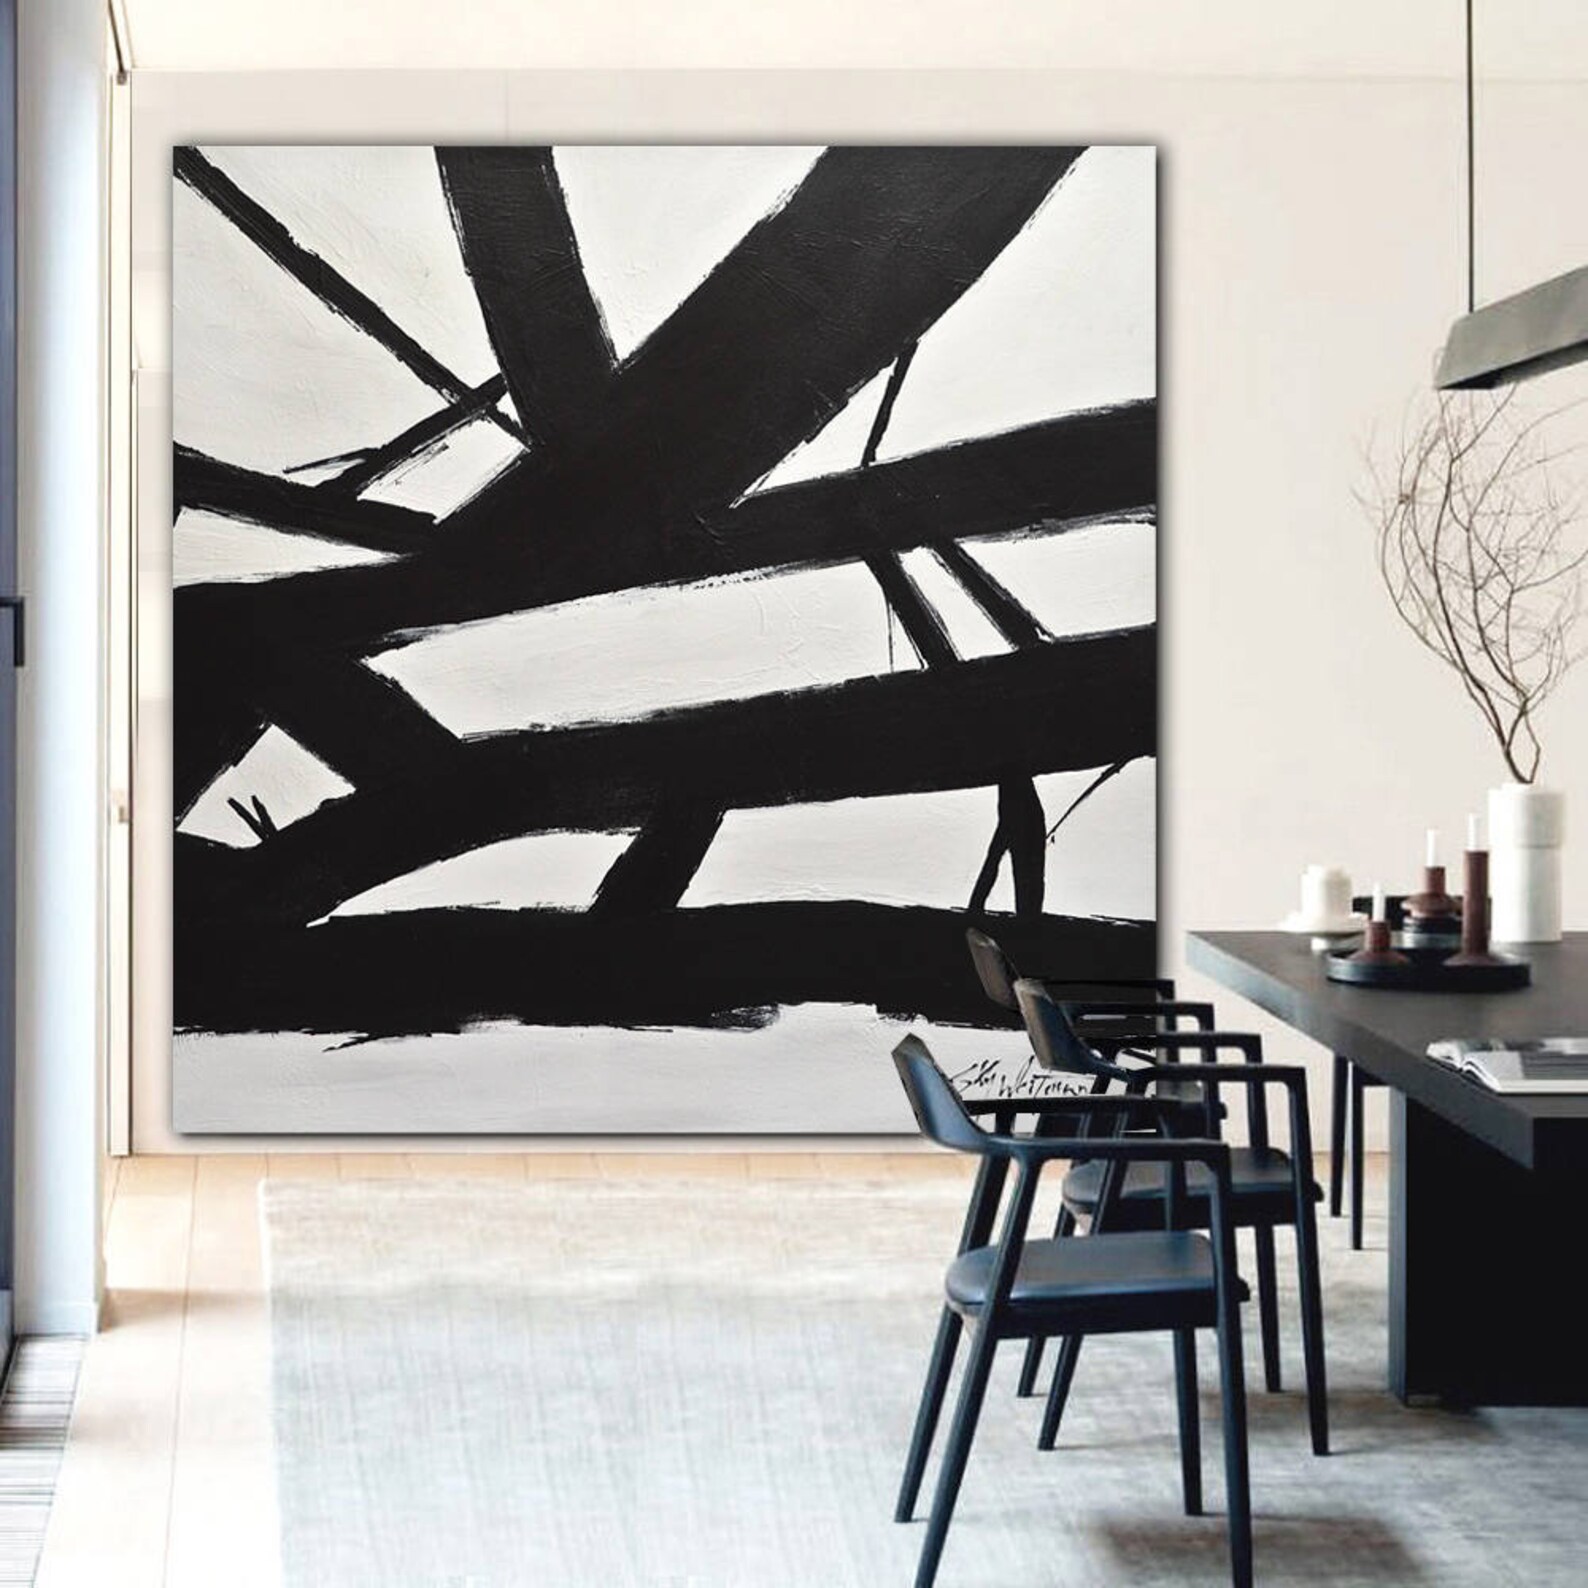 Minimalist Painting Black and White Abstract Art Large Wall | Etsy